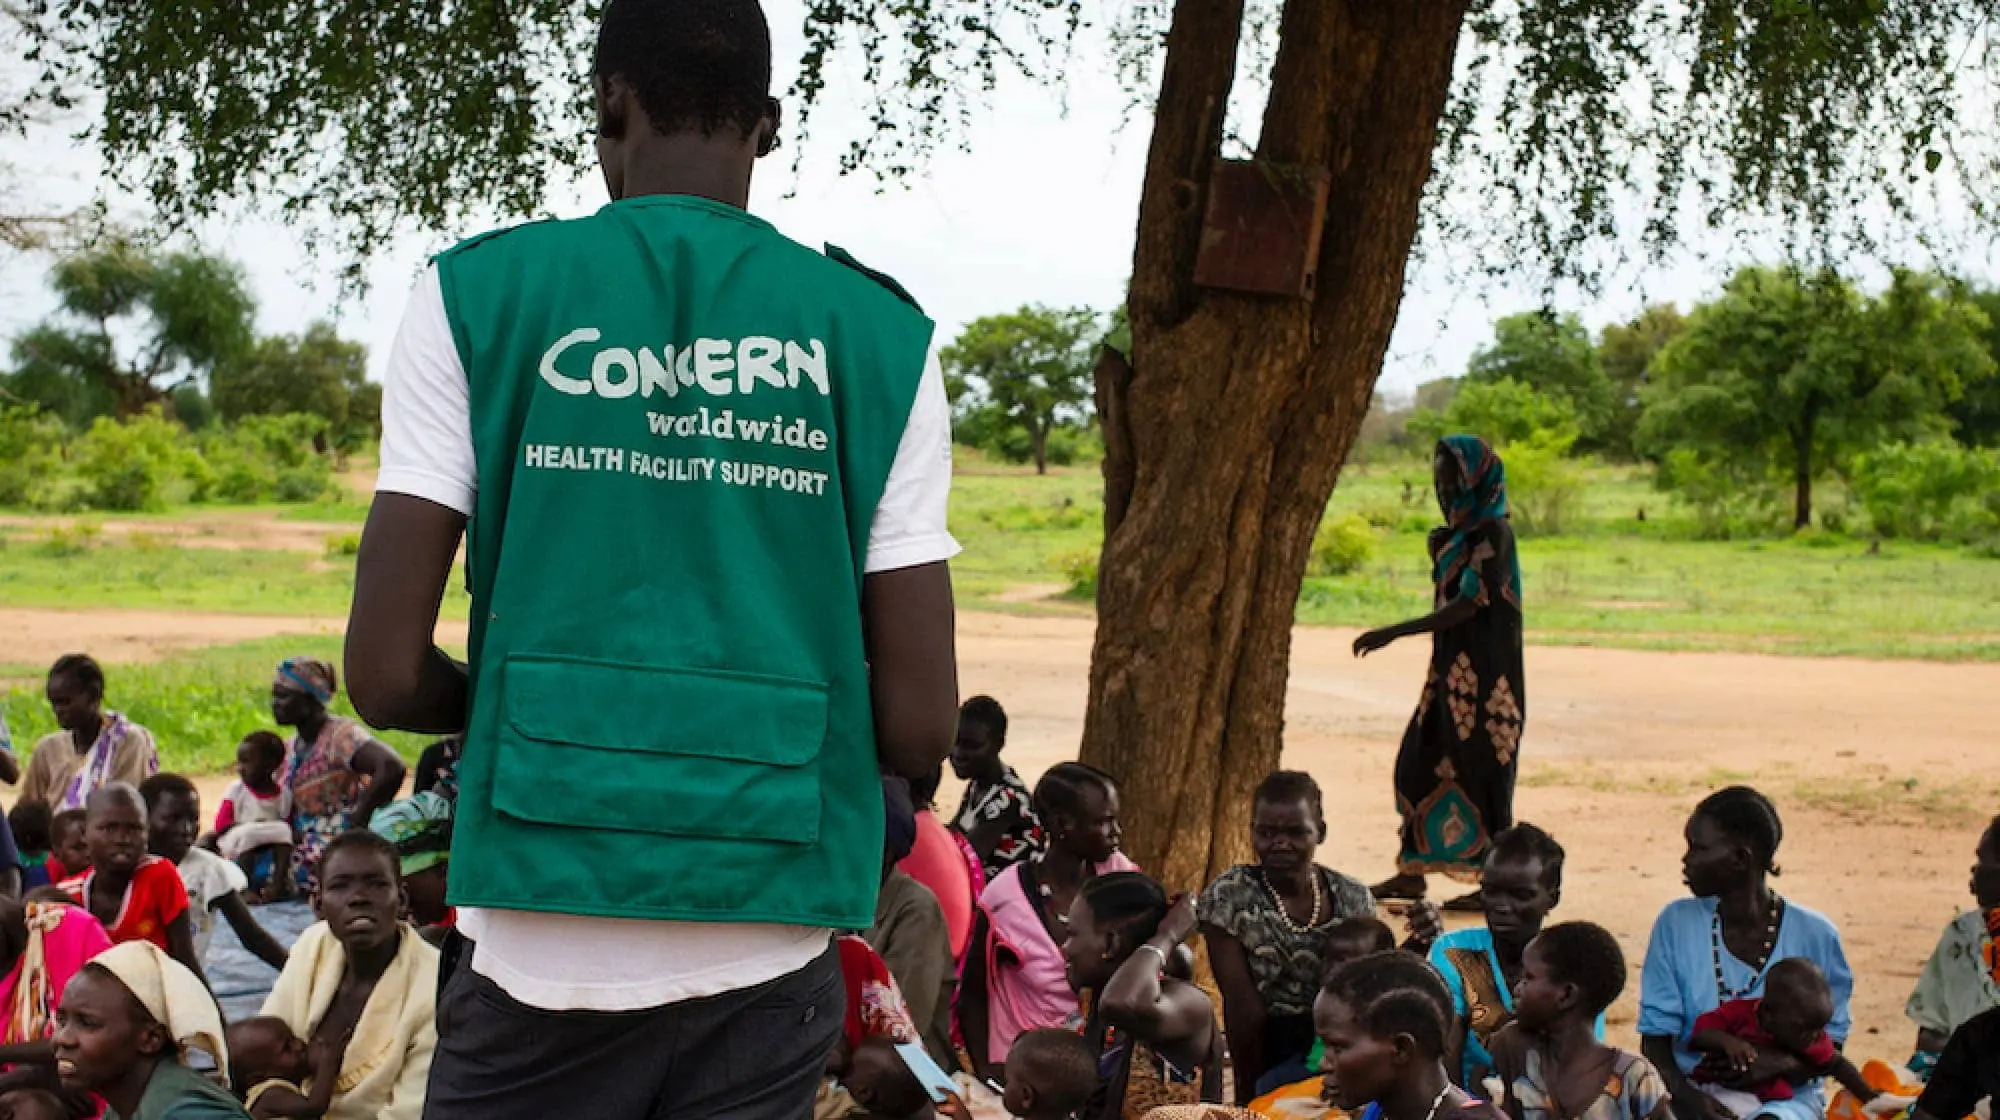 The community gathers for a Concern Worldwide Nutrition clinic at a health facility in a rural area of Aweil, South Sudan.